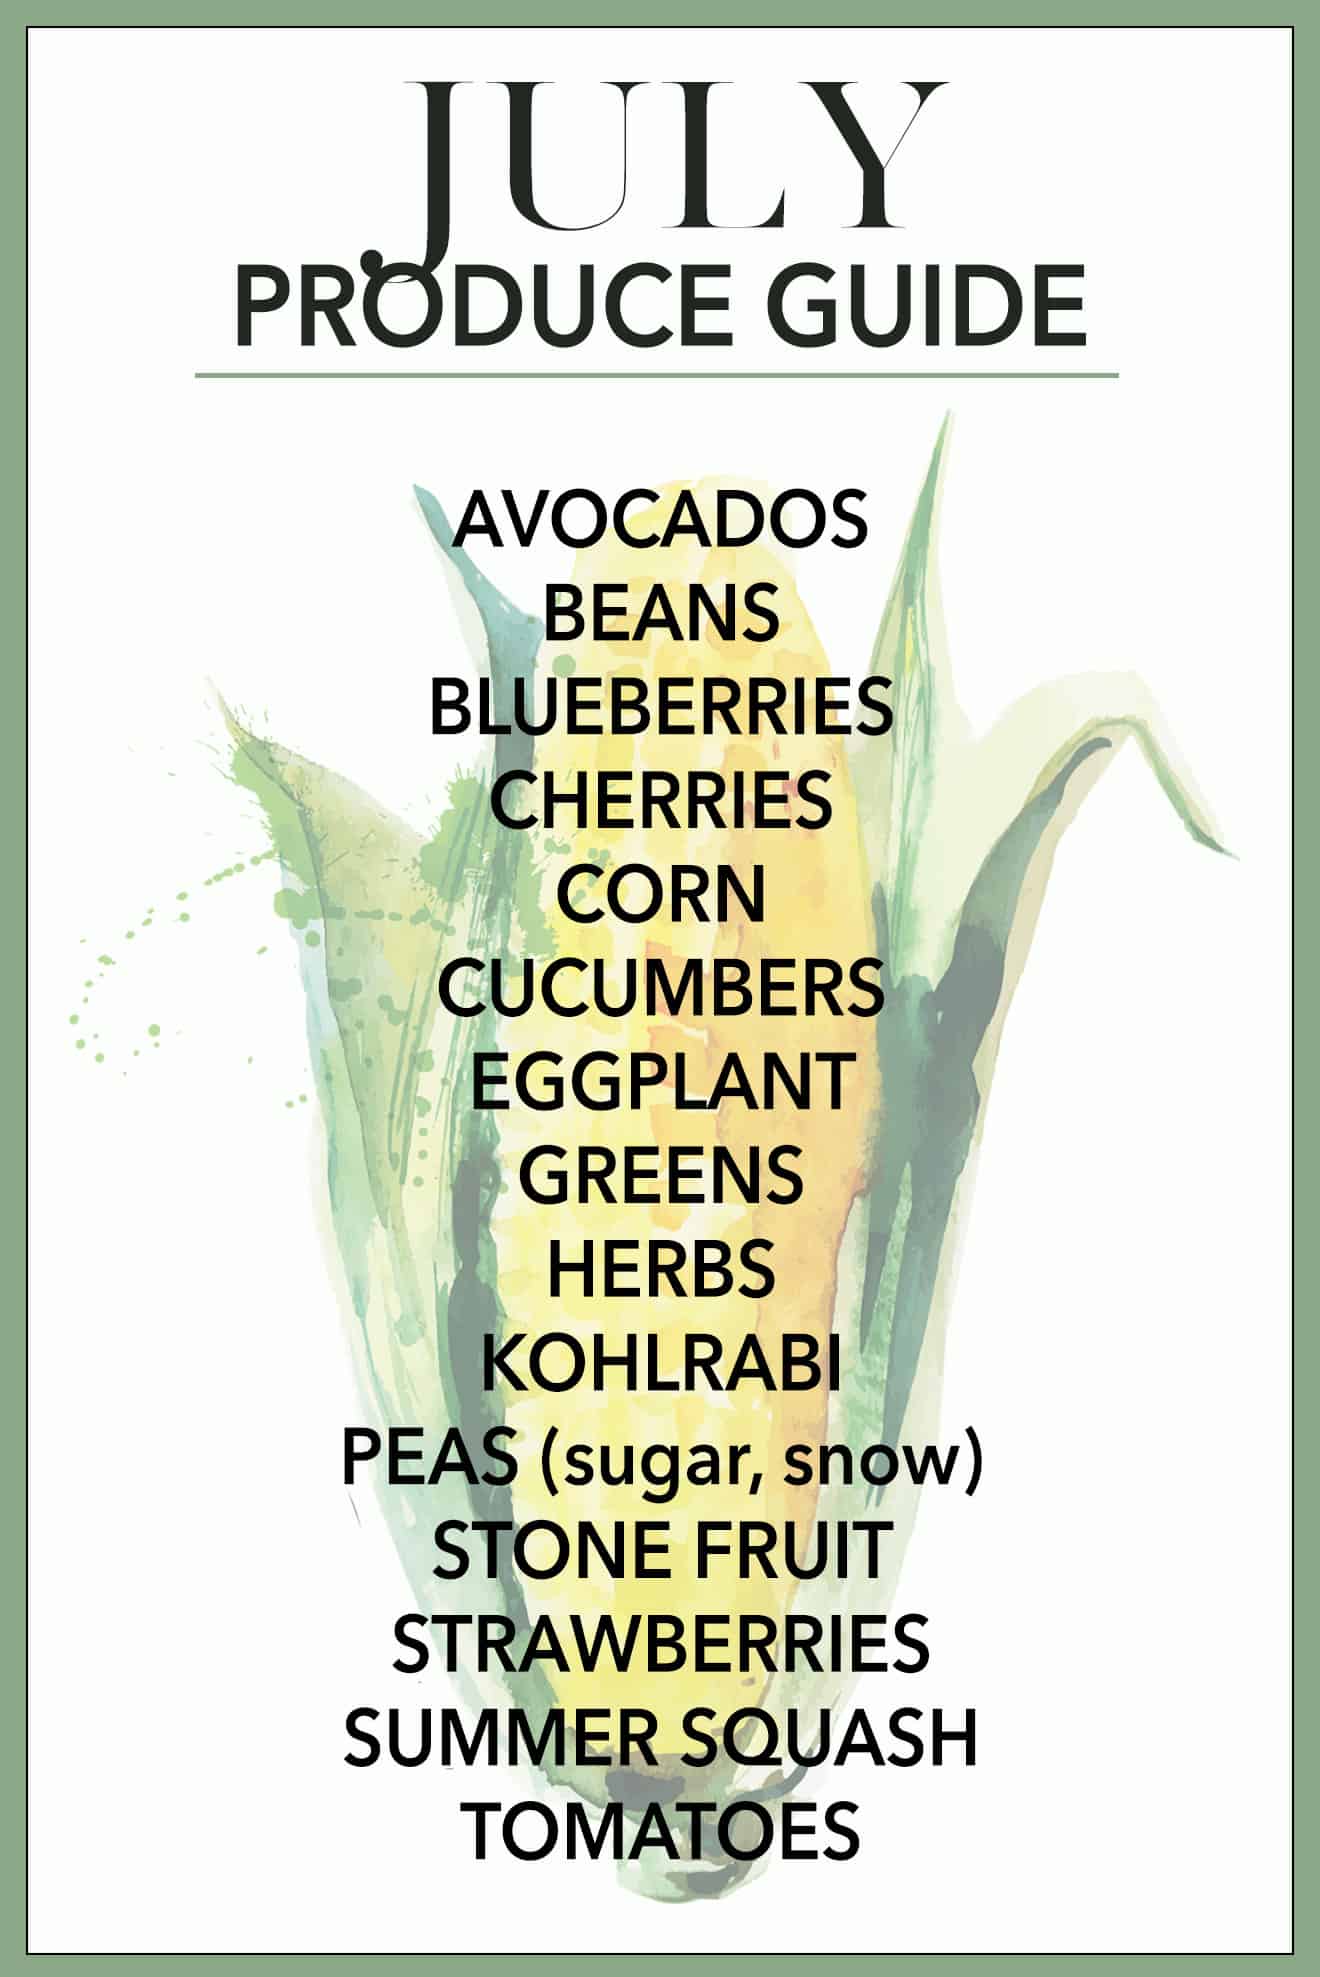 Find out what's in season in this July Produce Guide! You'll find tips on how to pick and store the produce as well as recipe ideas!